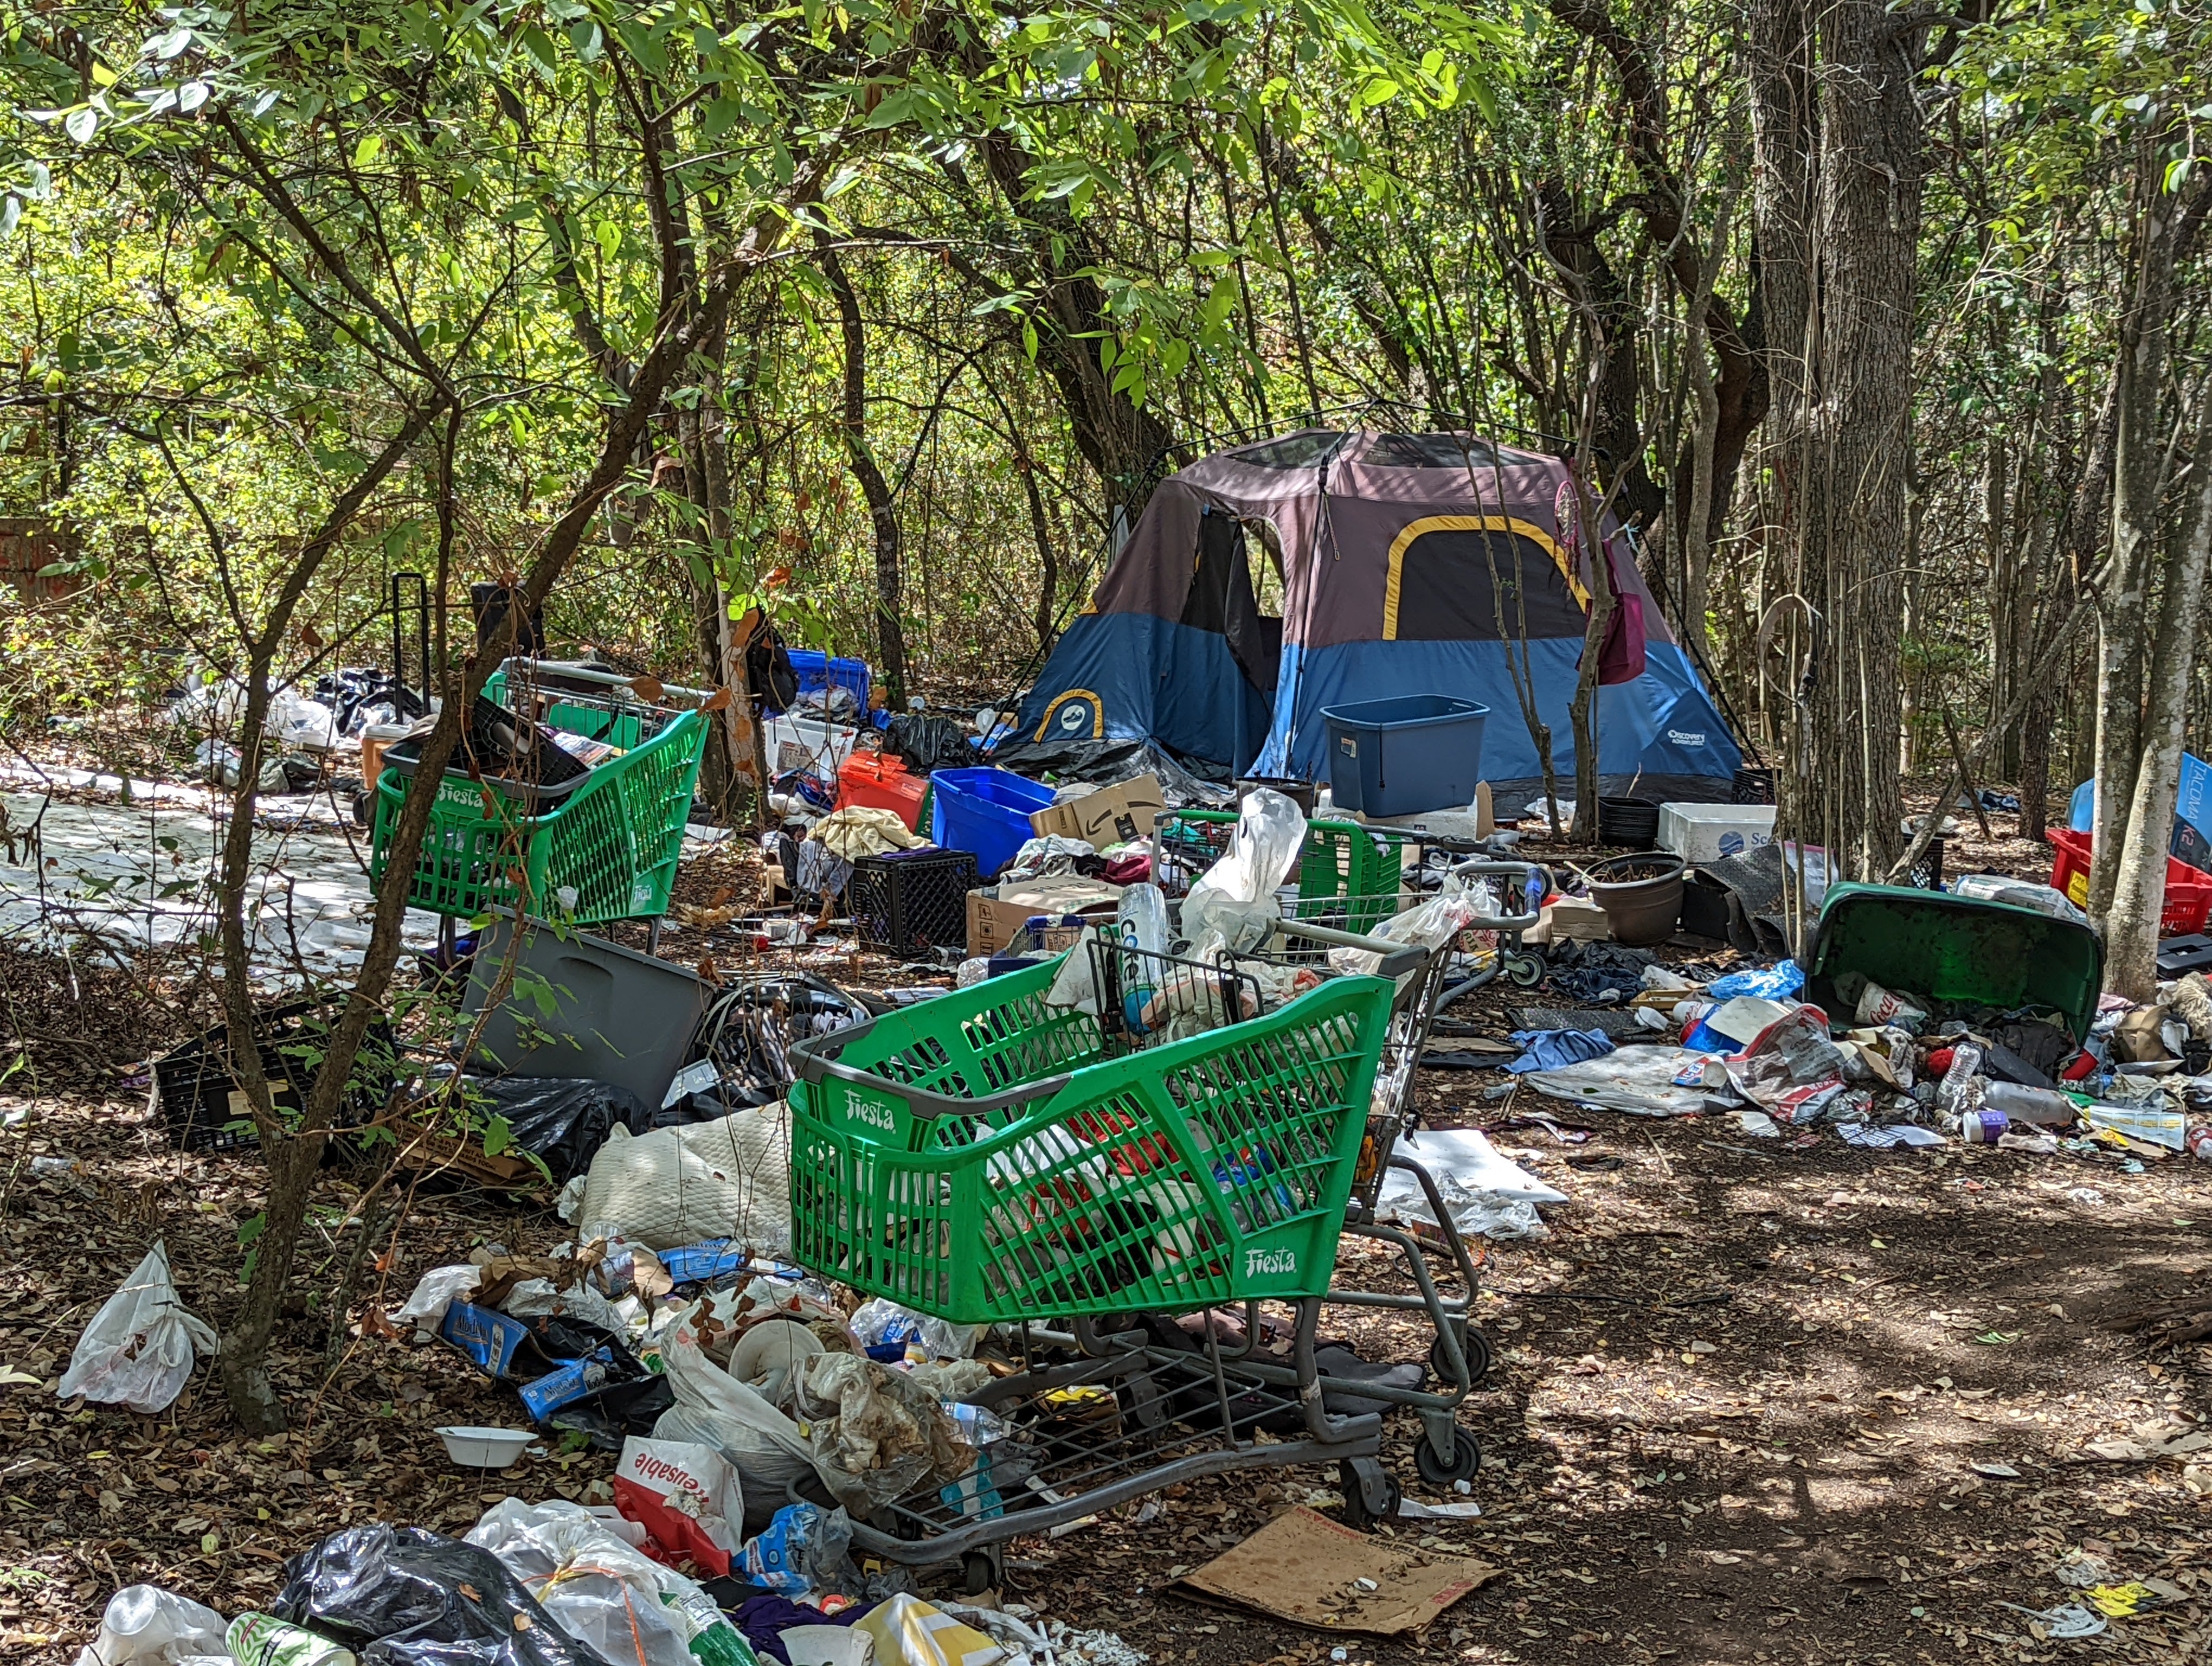 Austin man who was once homeless maps camps springing up around the city, b...